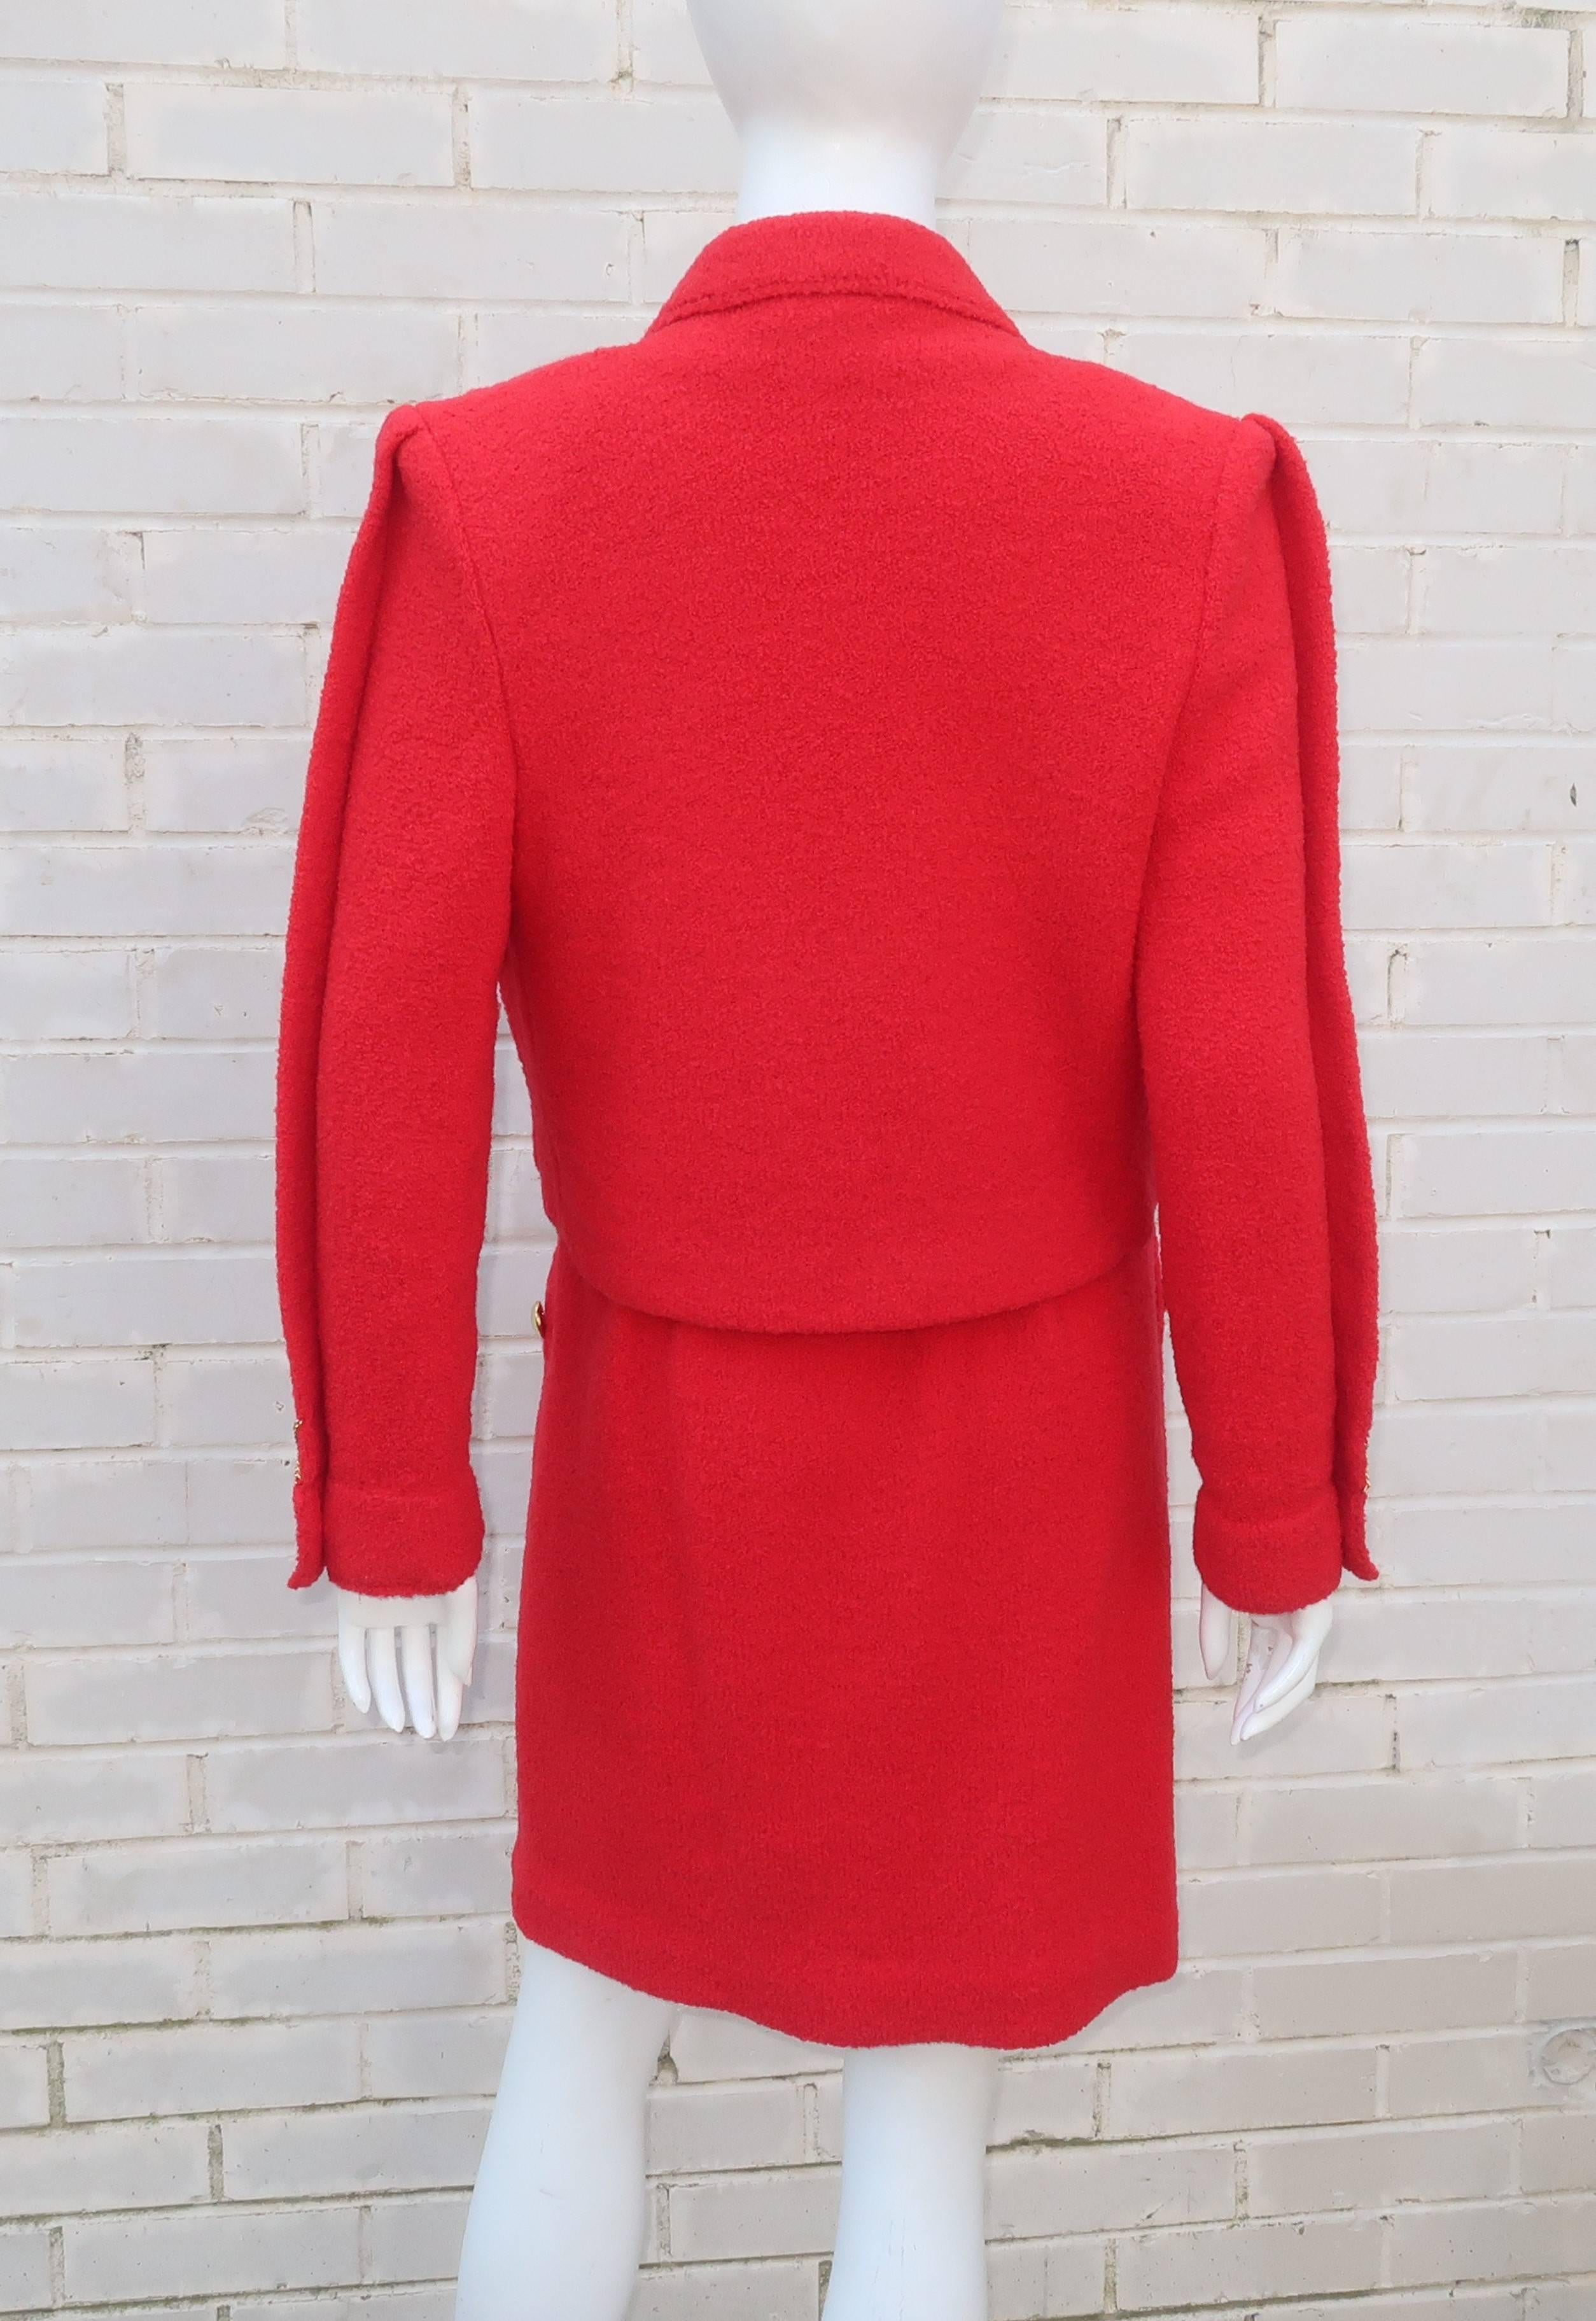 Adolfo Red Boucle Knit Skirt Suit With Chain Details, 1980s 4